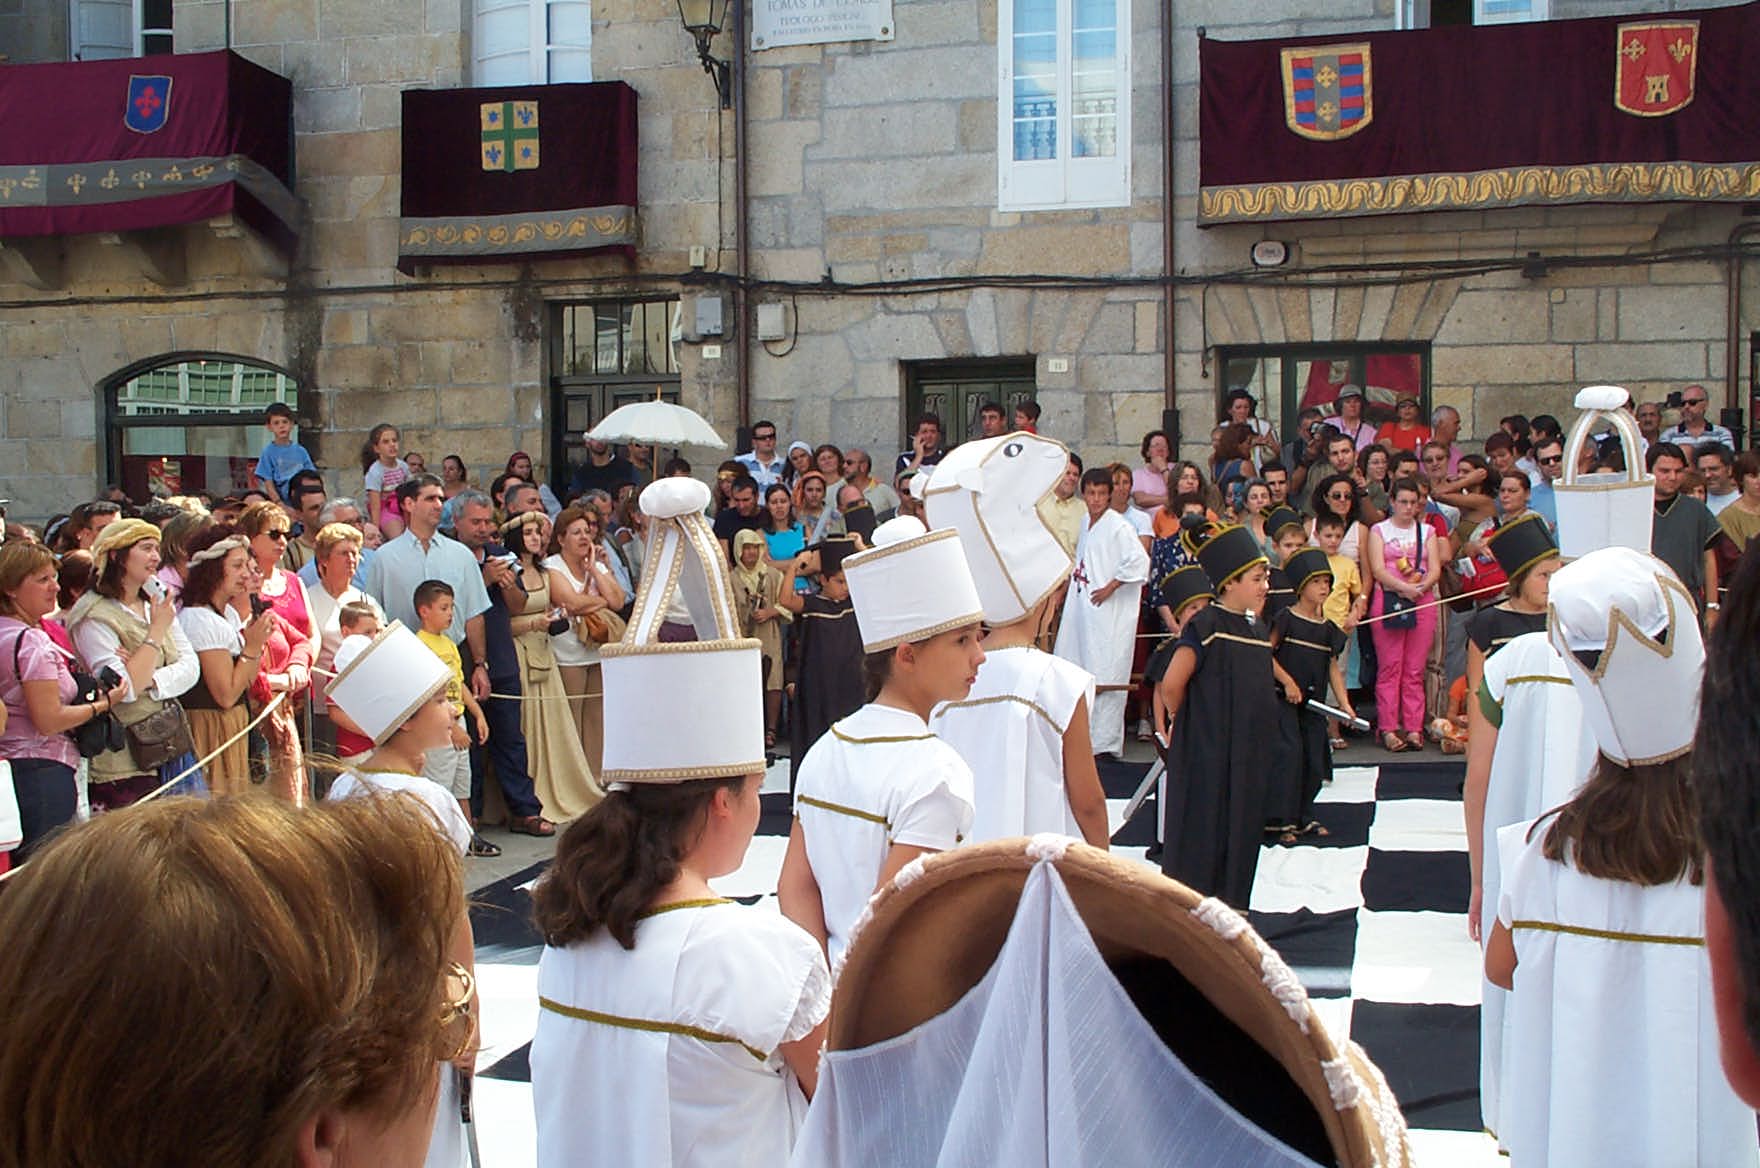 a group of people dressed in costumes on a chess board